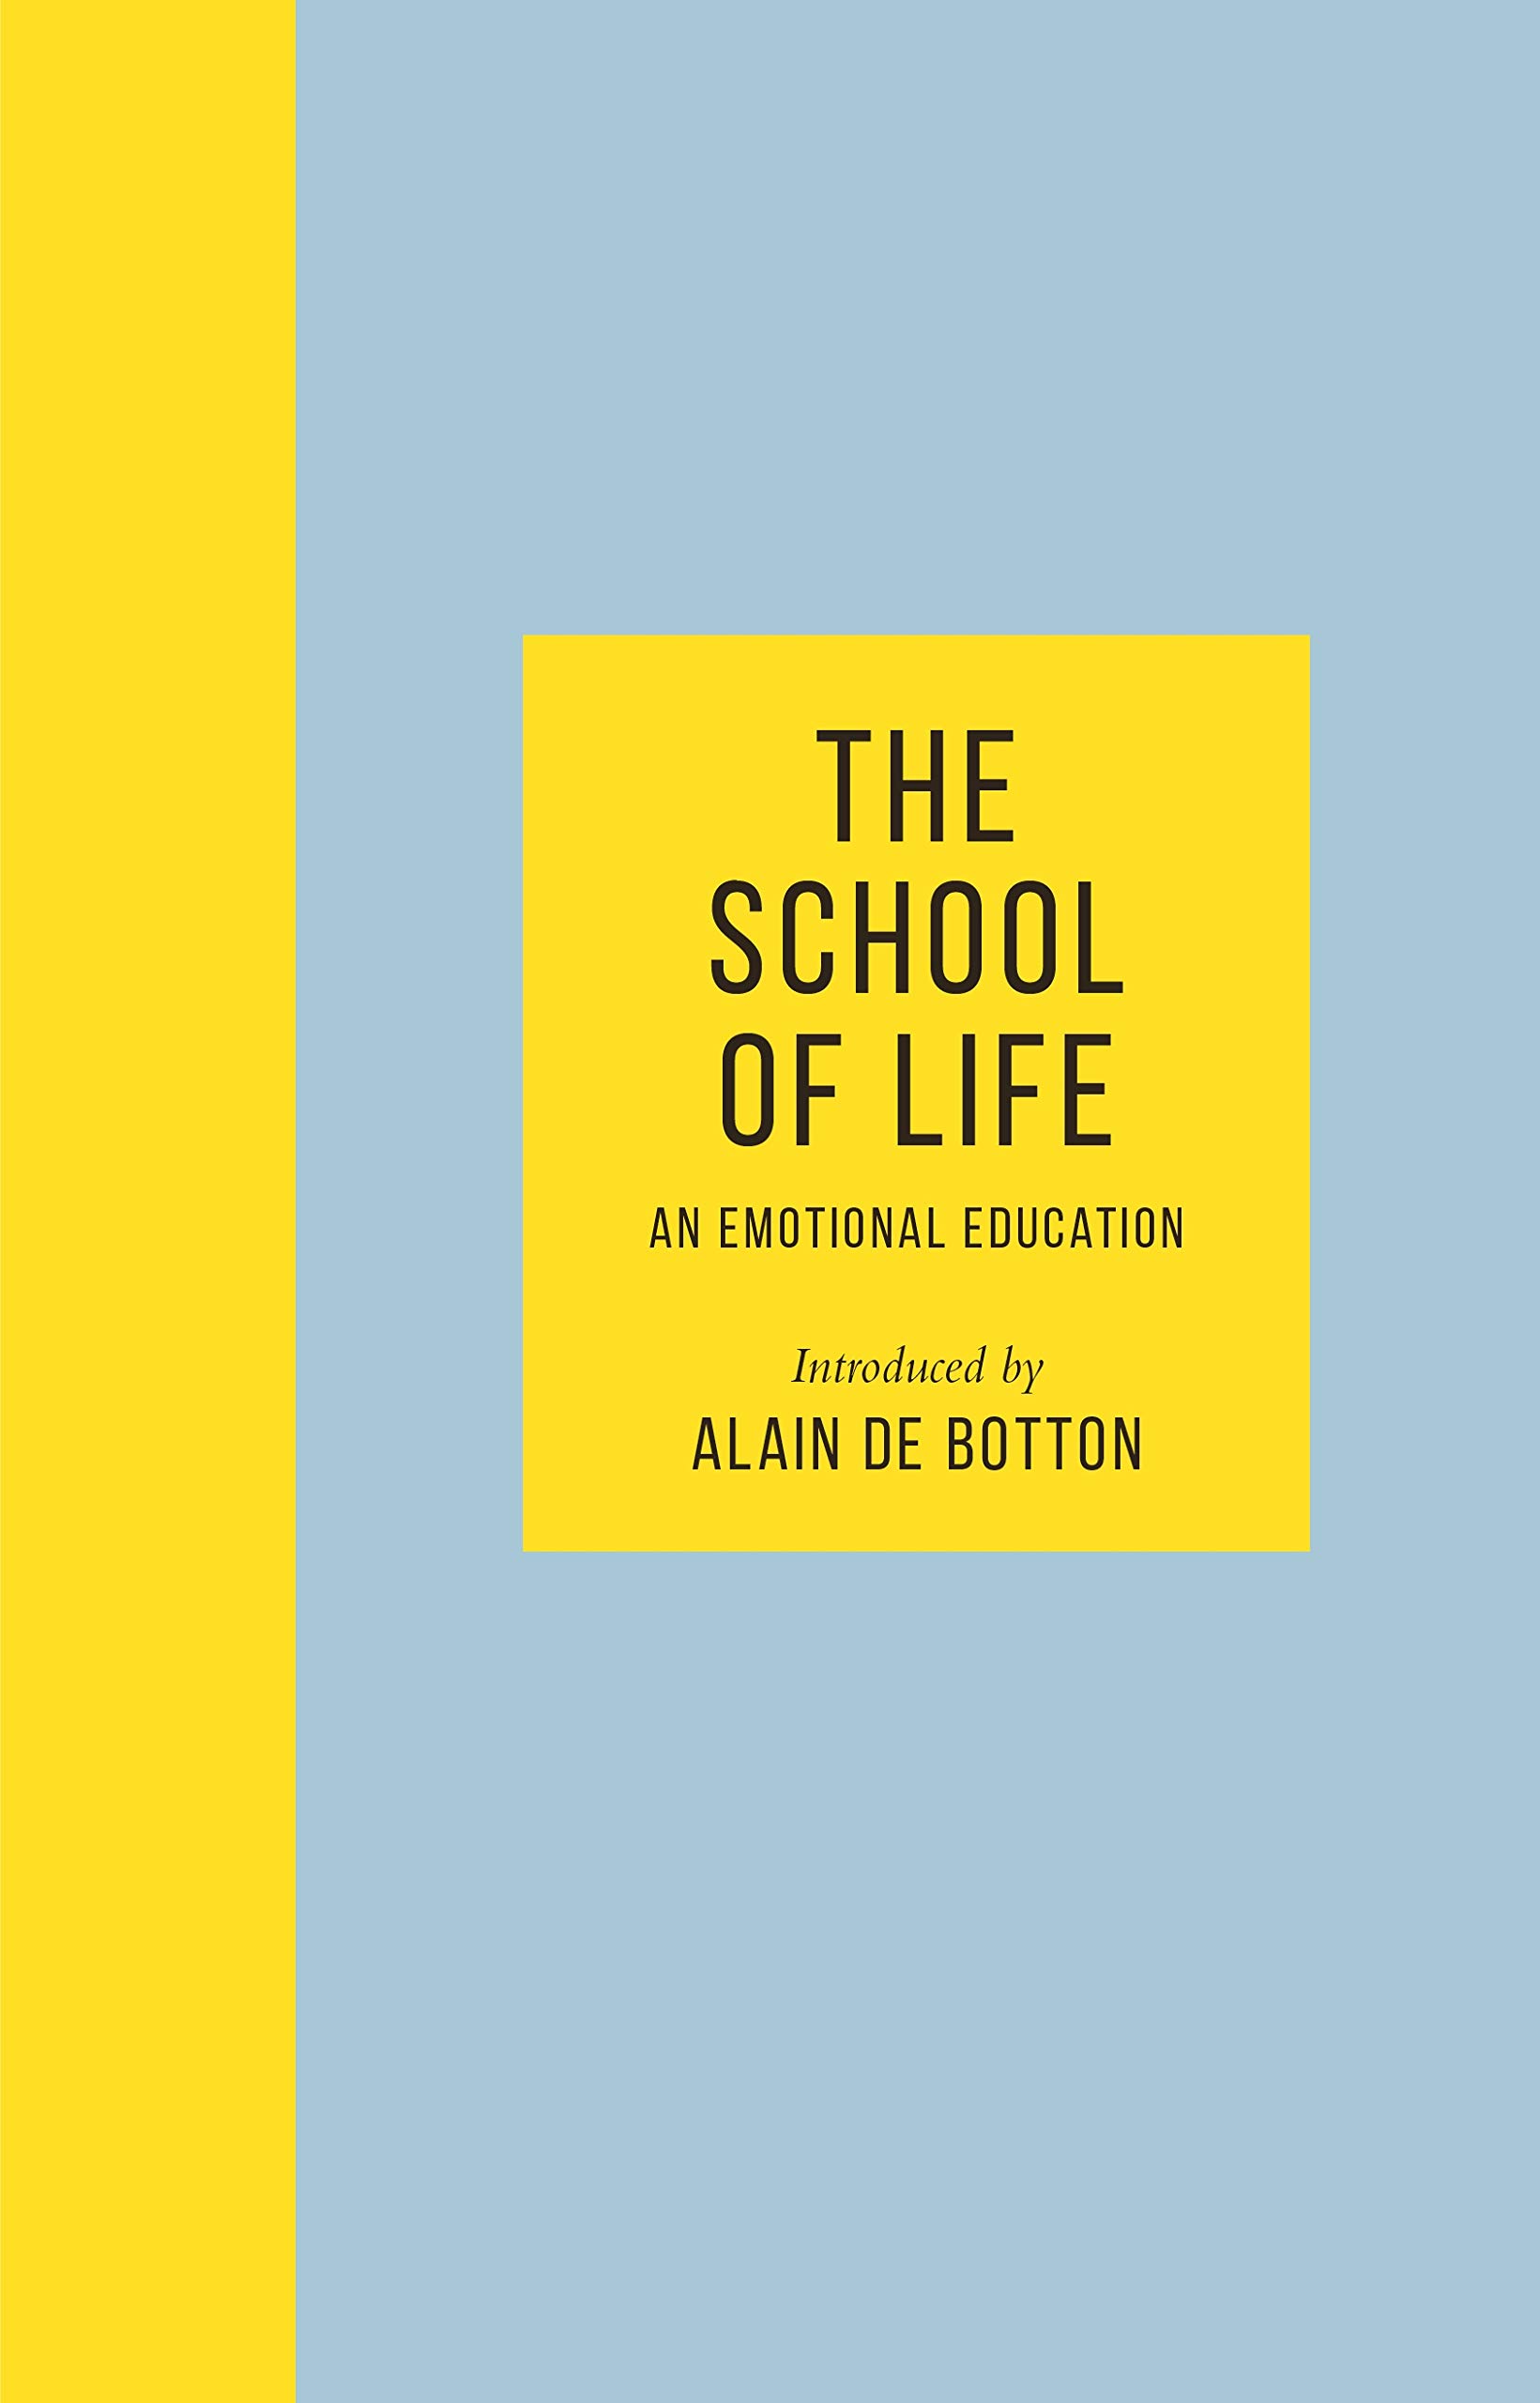 When Does The School of Life: An Emotional Education Publish? Release Date